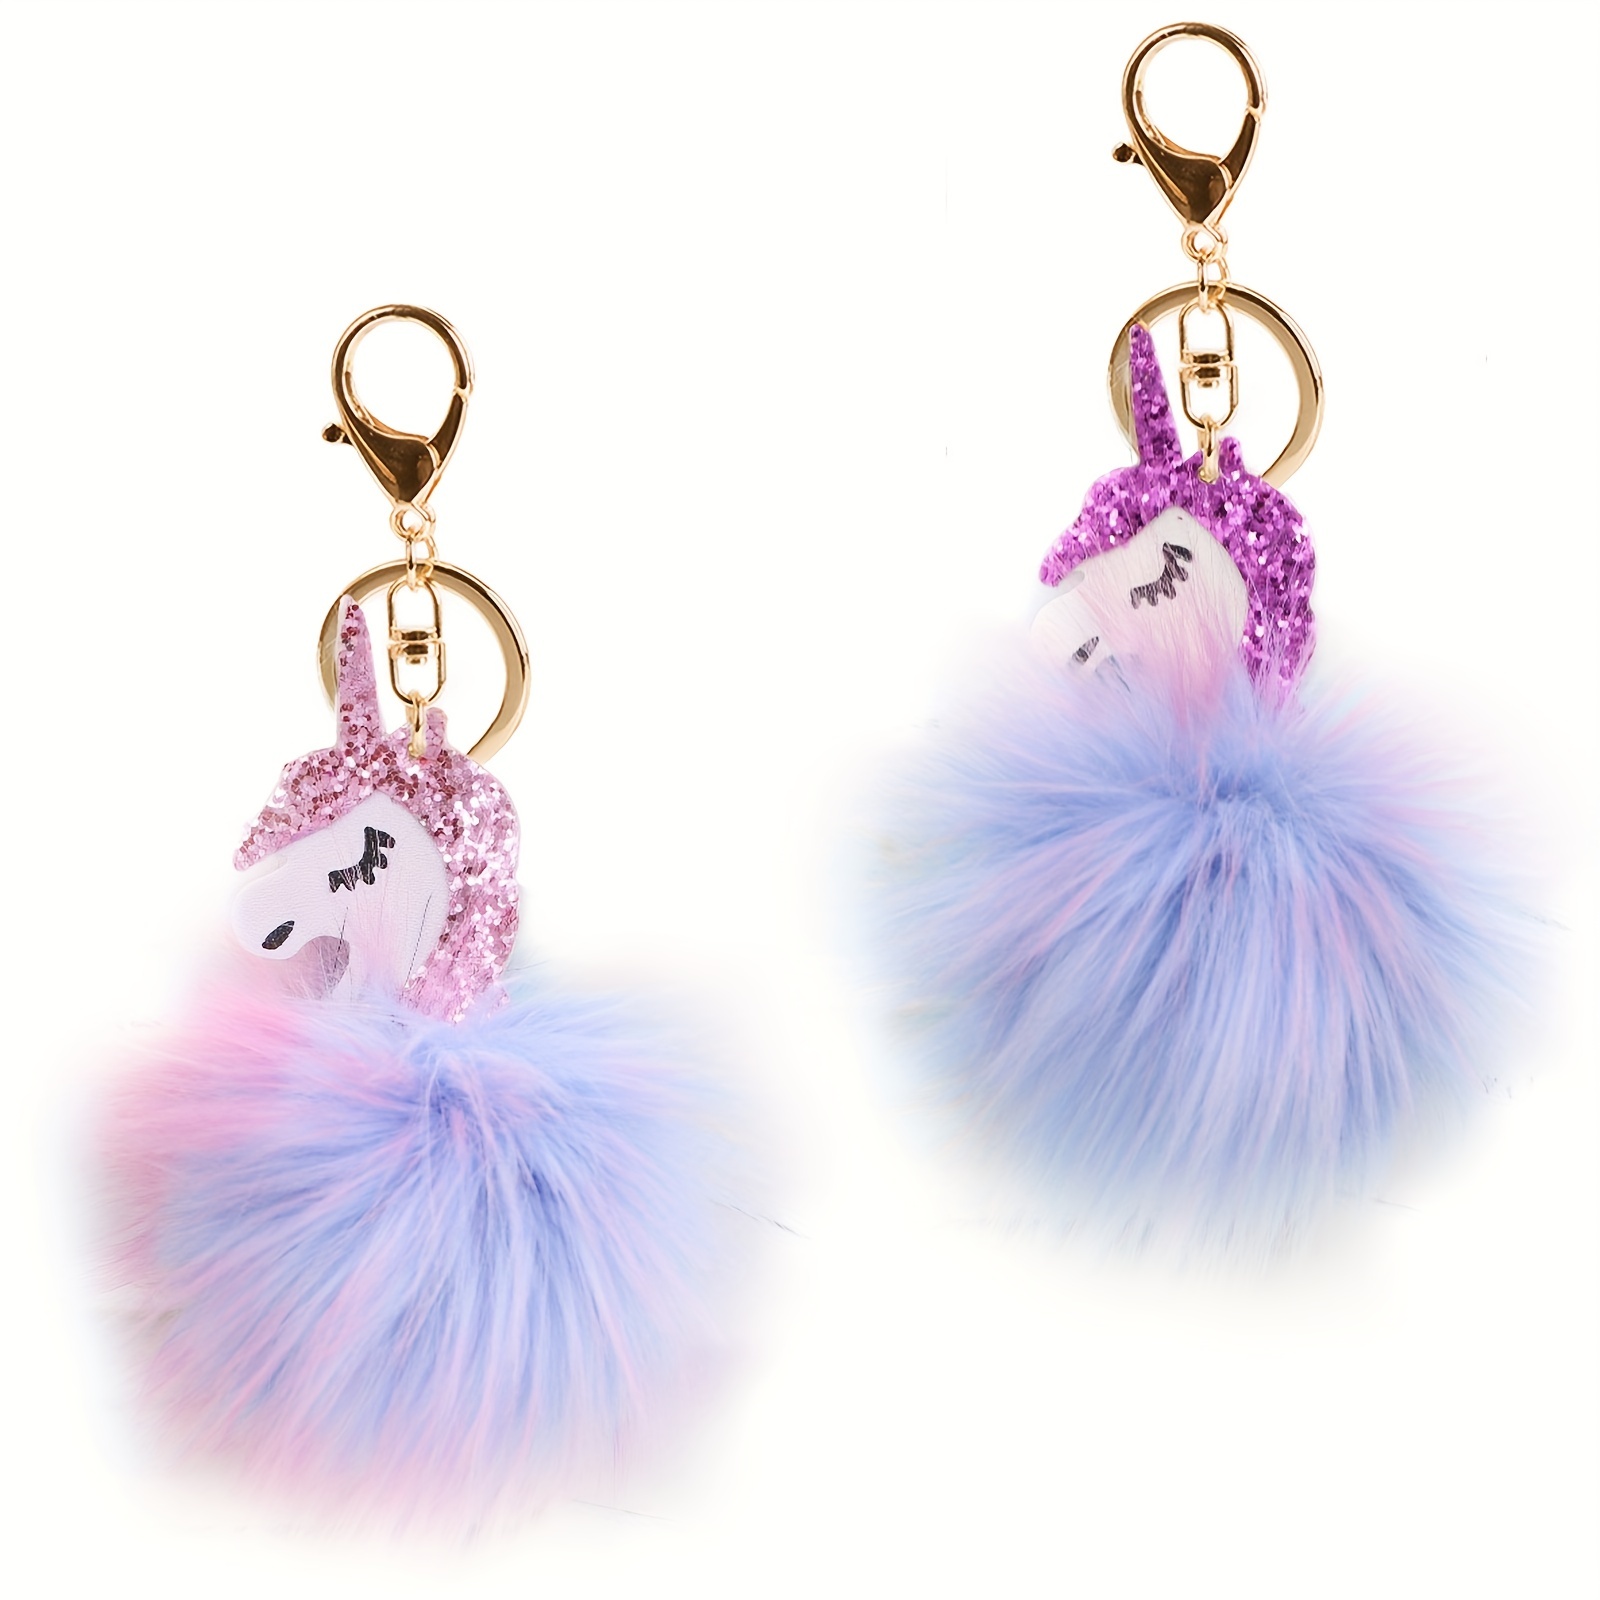 Fluffy Plush Ball Keychain Multicolor - Rose Red / 8 cm/3.1 Inches